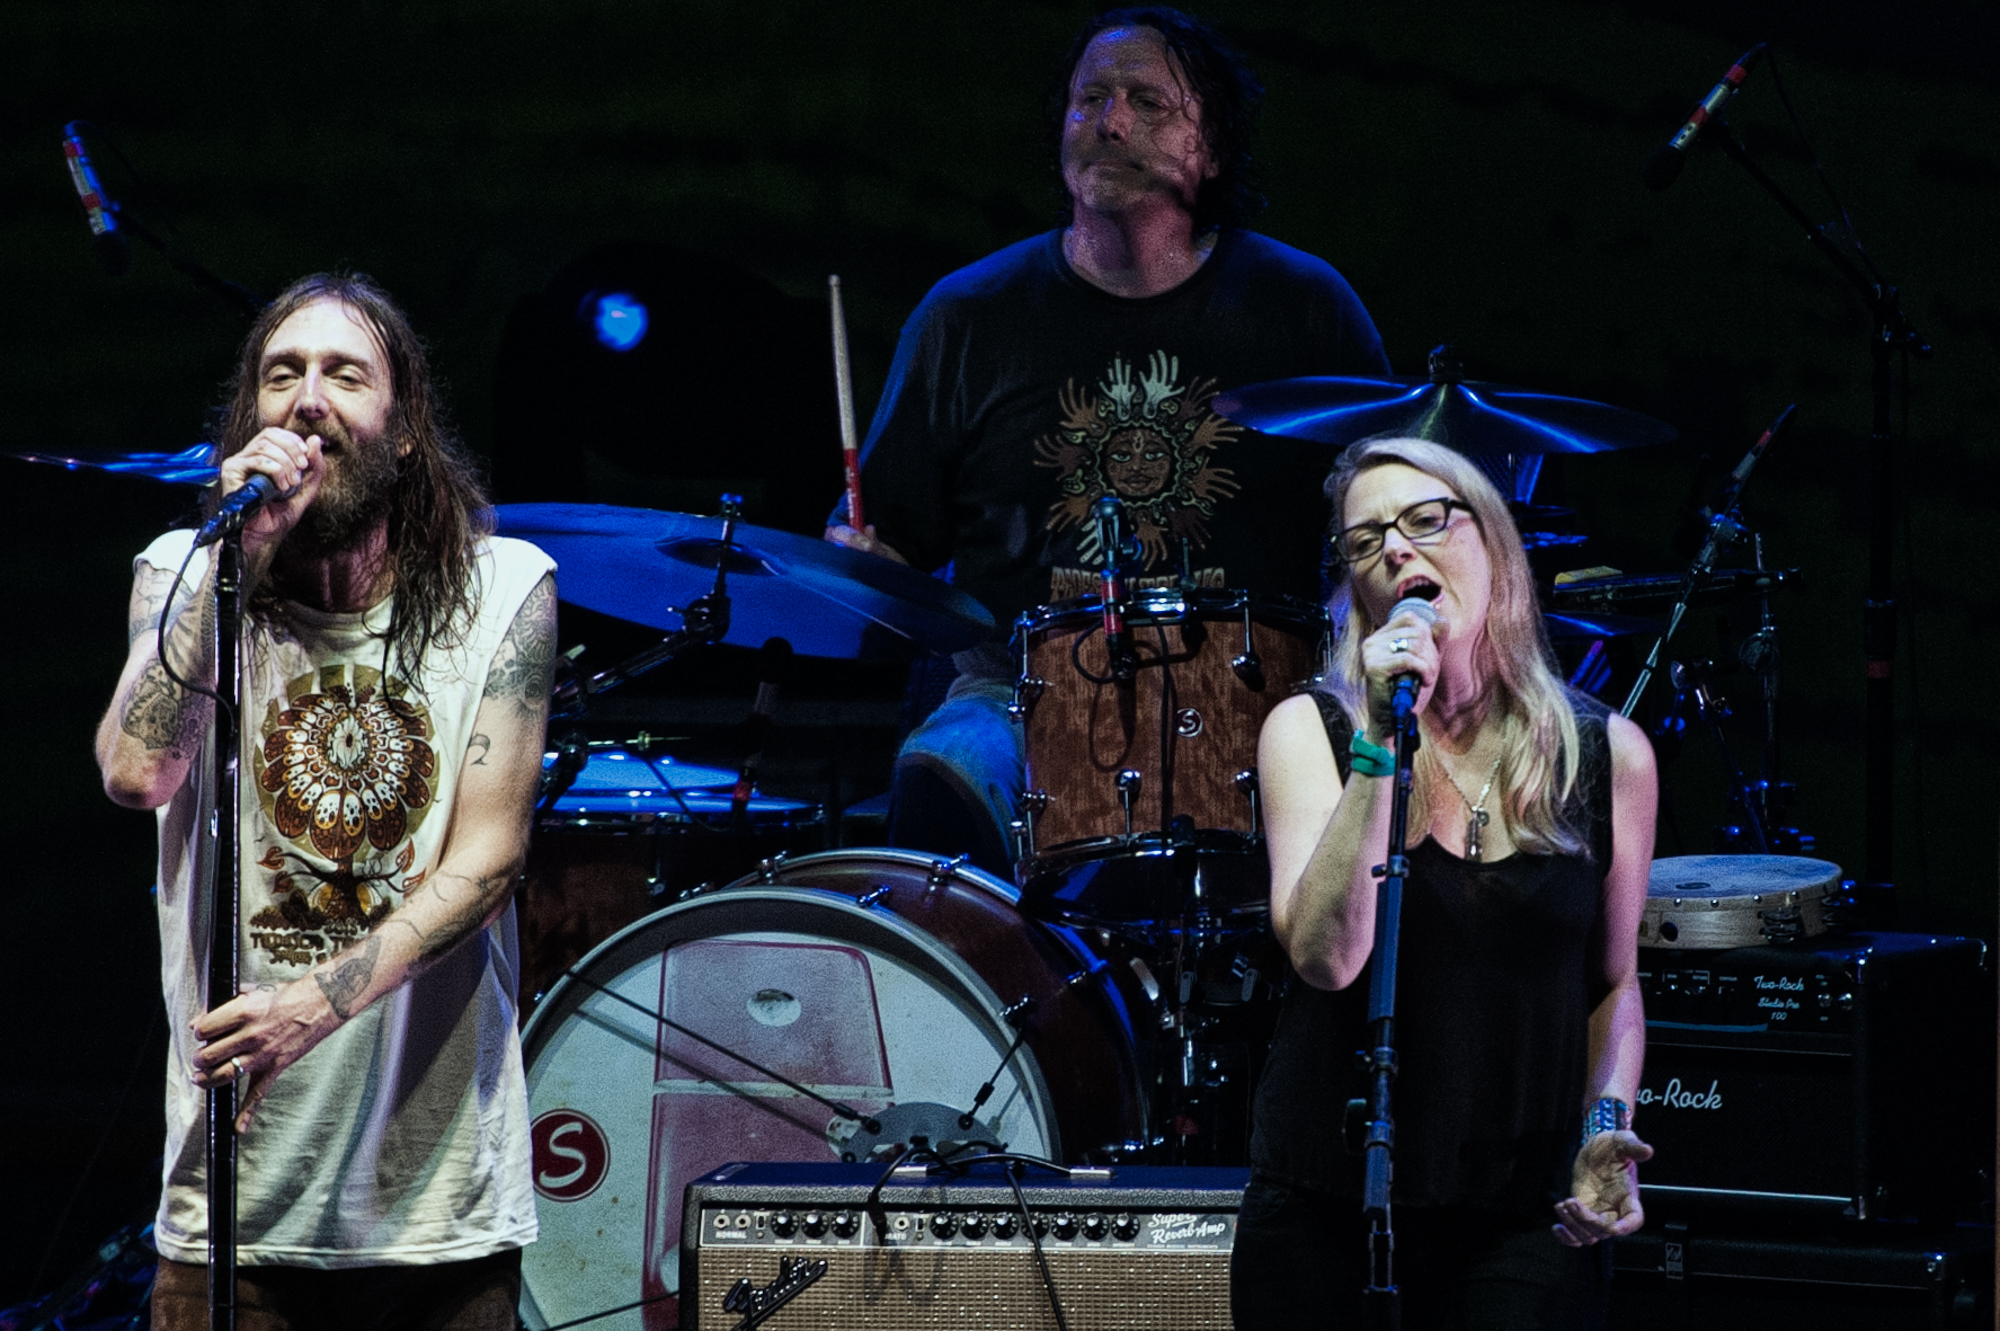 Photos The Black Crowes W Tedeschi Trucks Band 08 09 13 Pnc Bank Arts Center Holmdel New